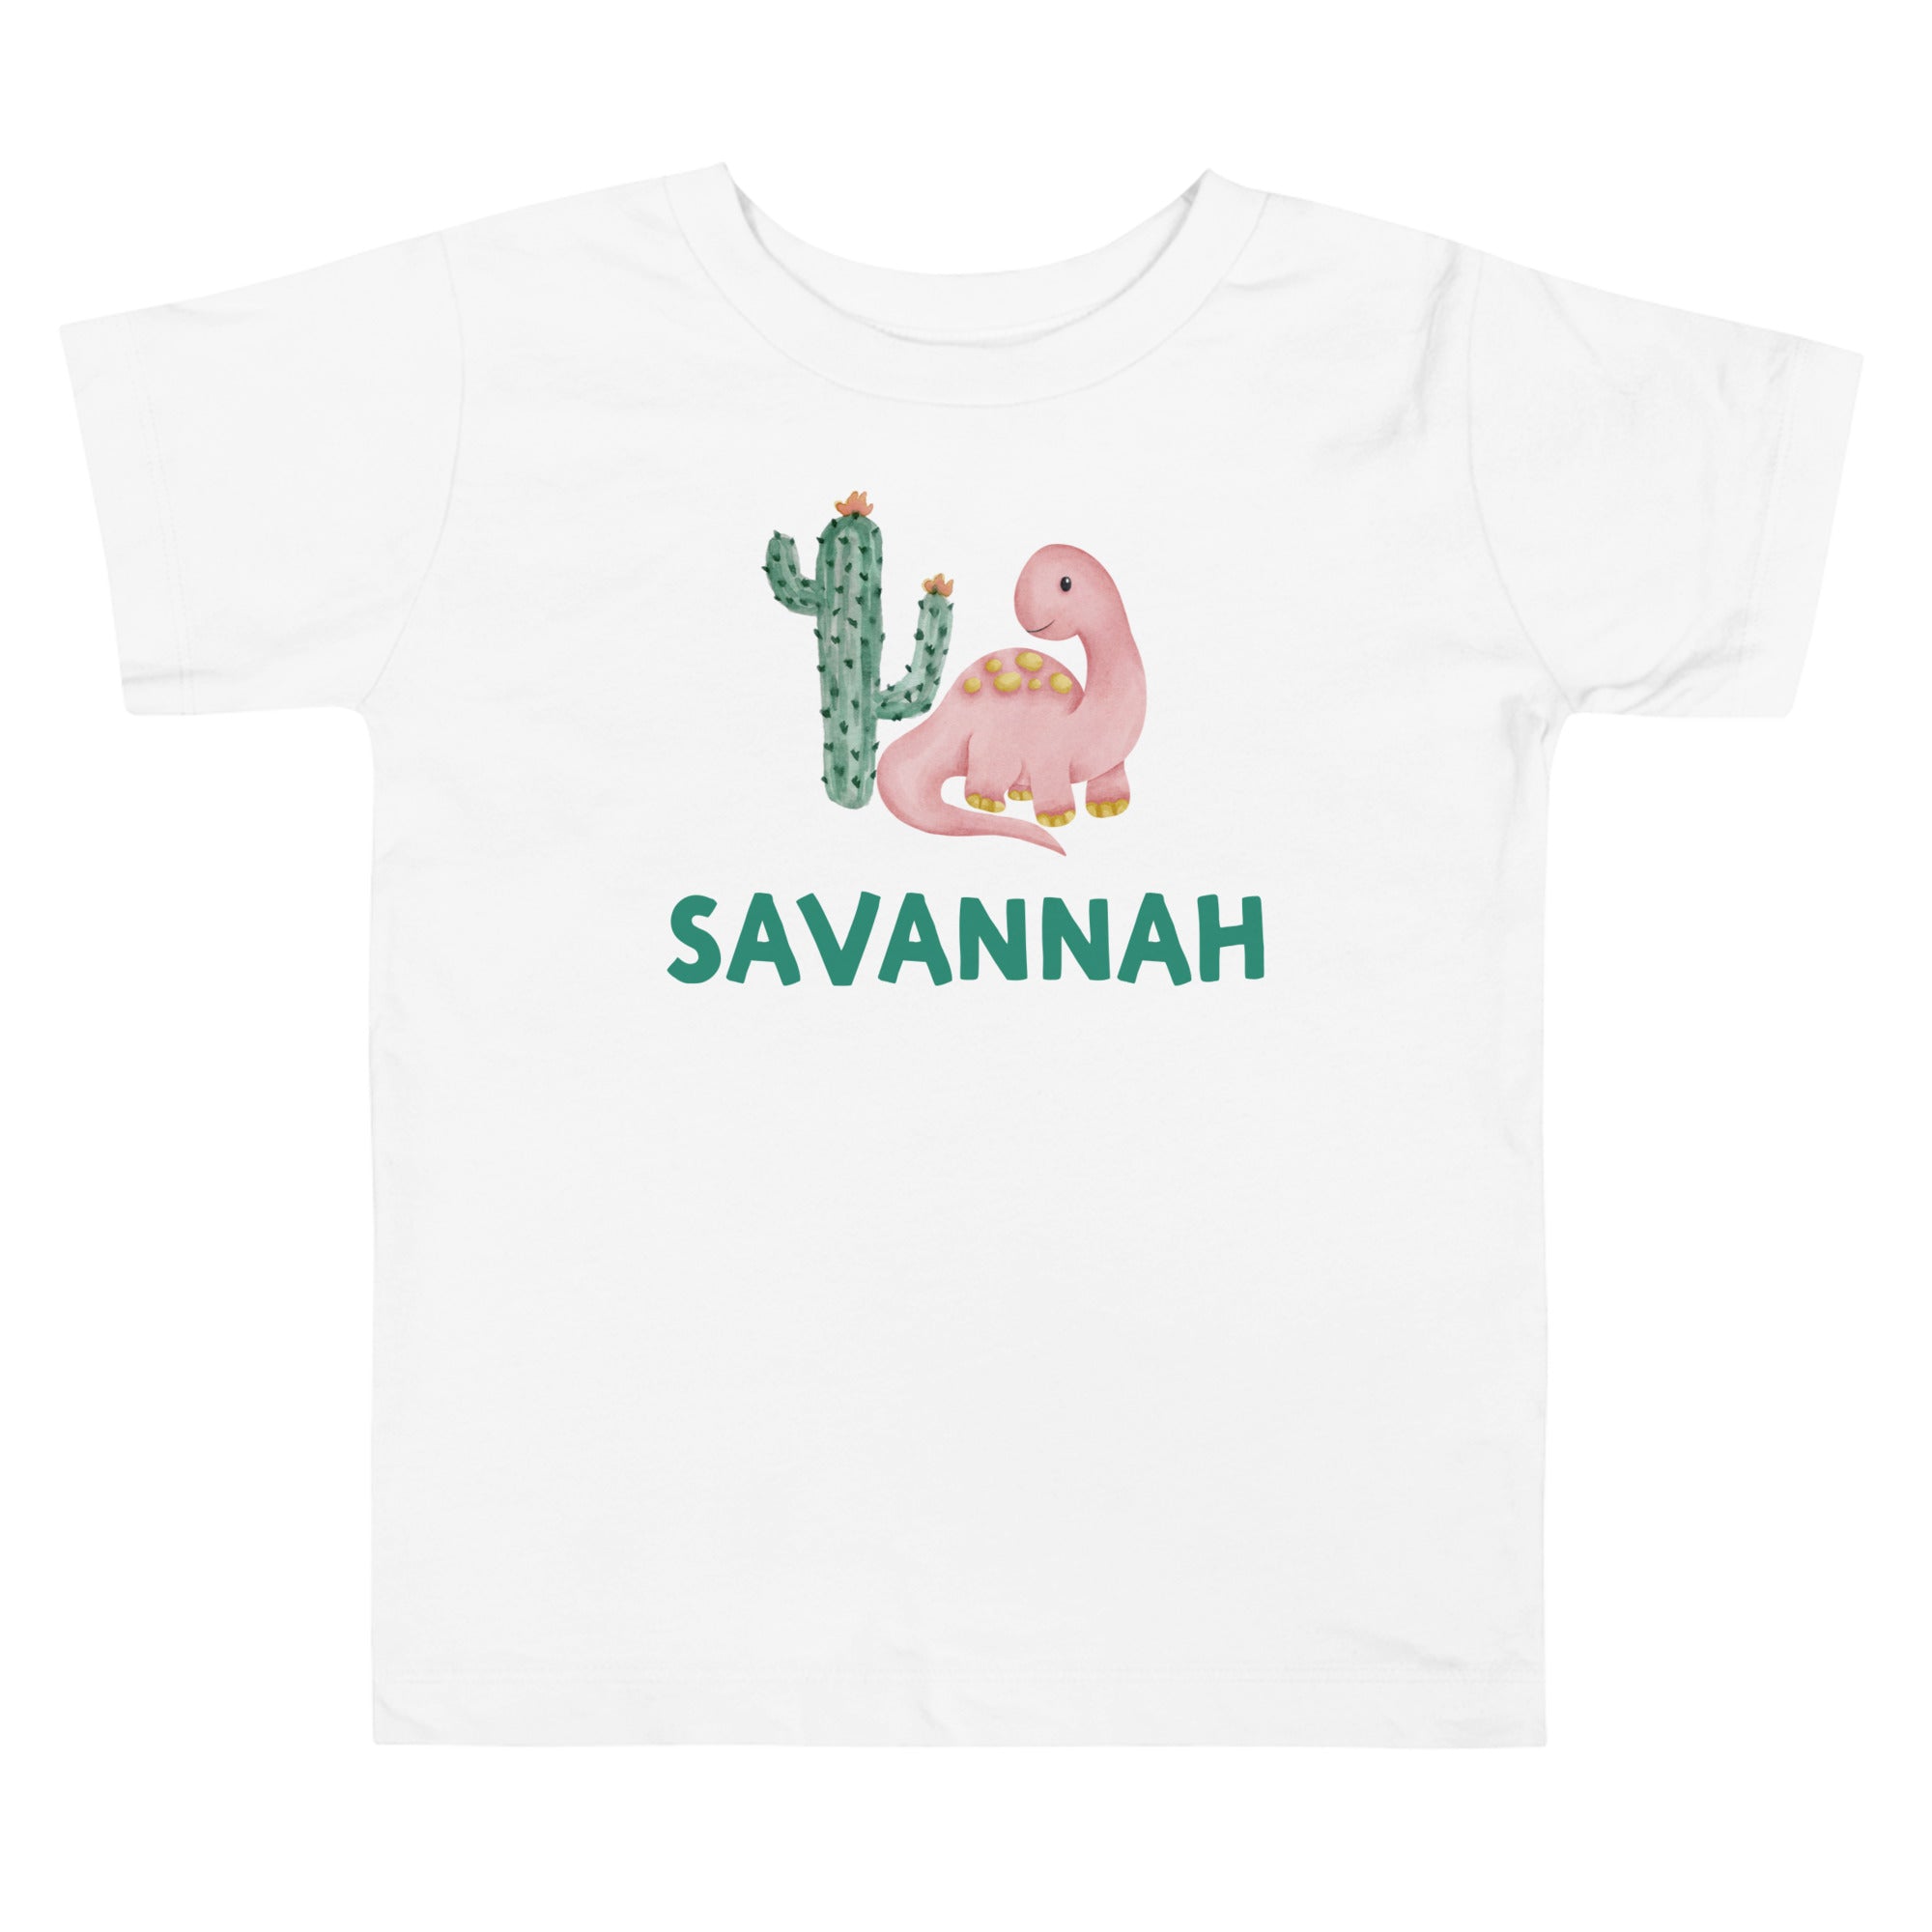 Personalized kids tee with a dinosaur